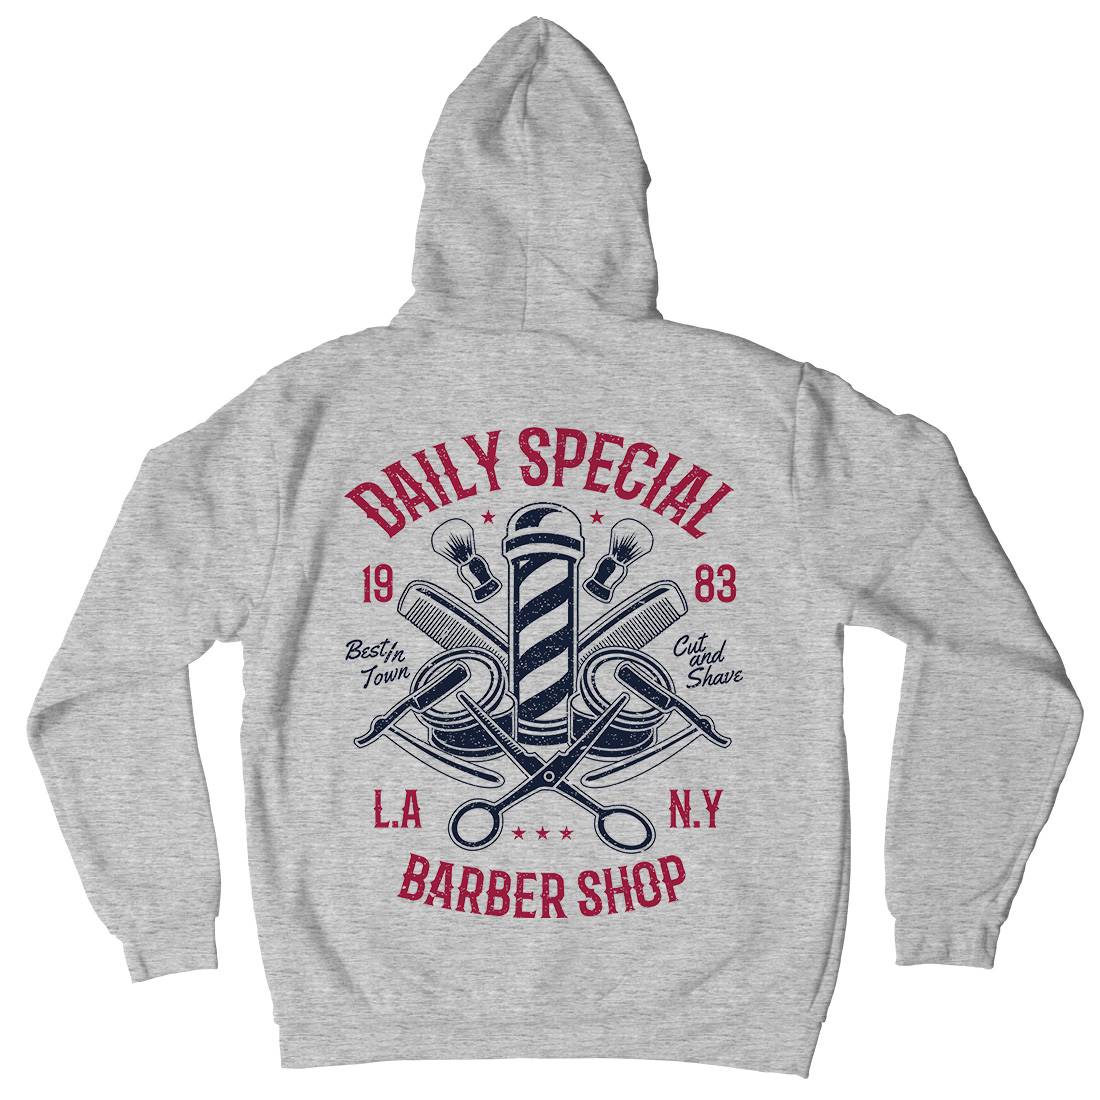 Daily Special Shop Kids Crew Neck Hoodie Barber A041